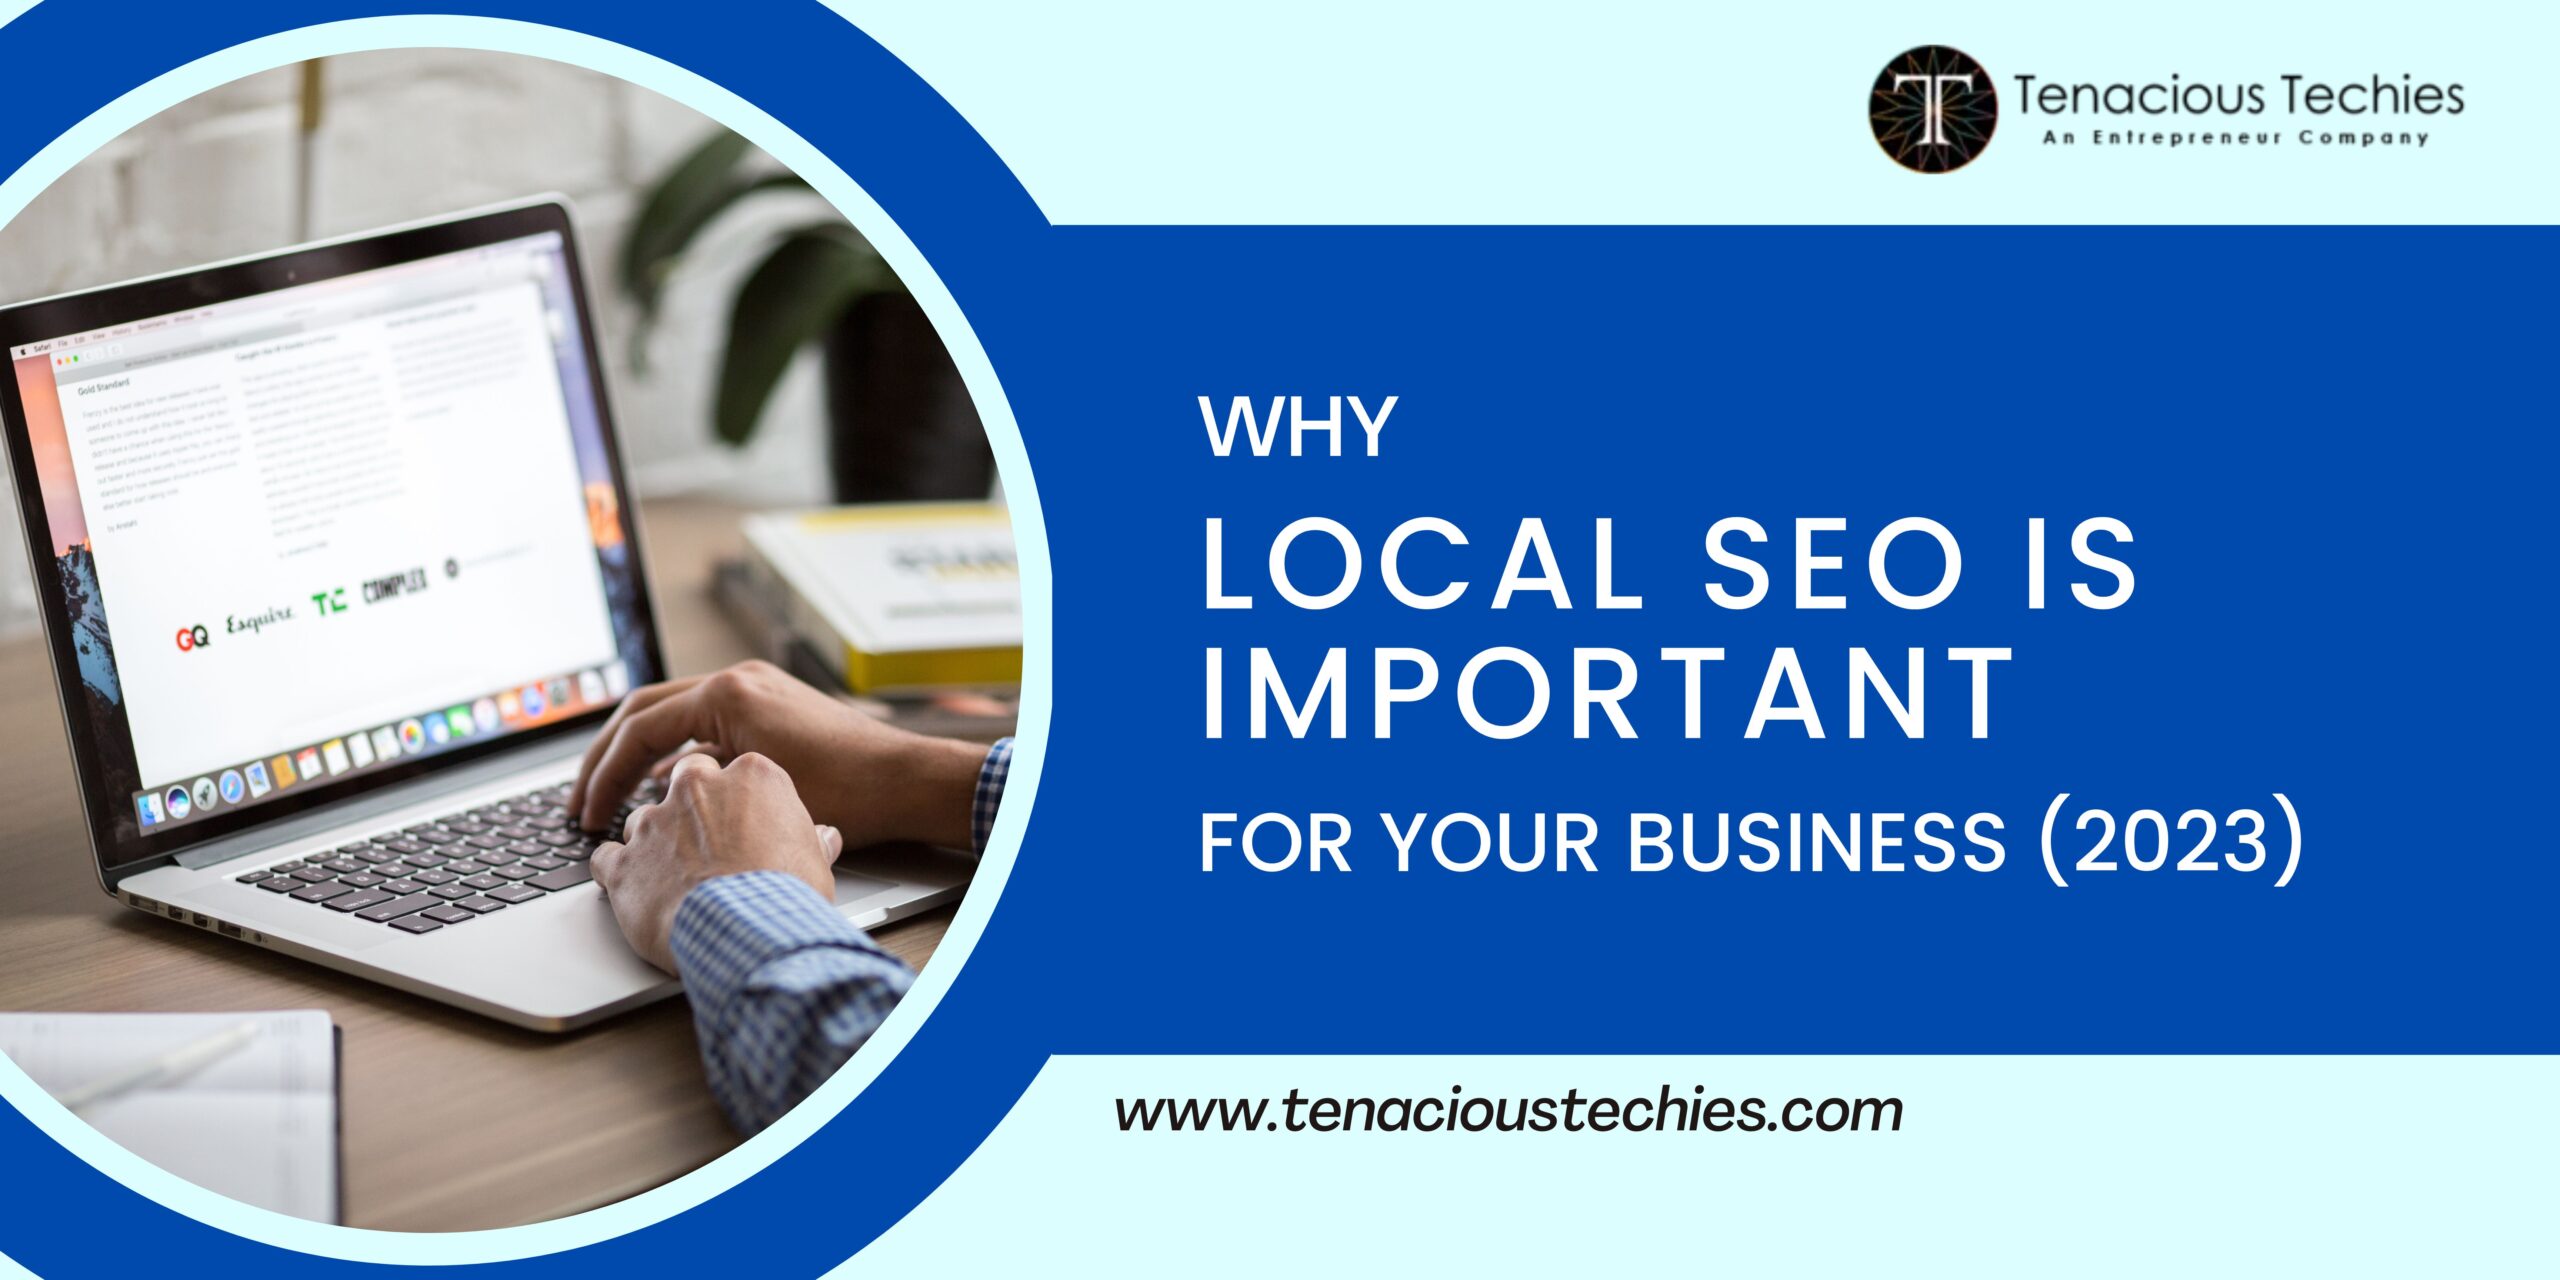 Why Local SEO is important for your business